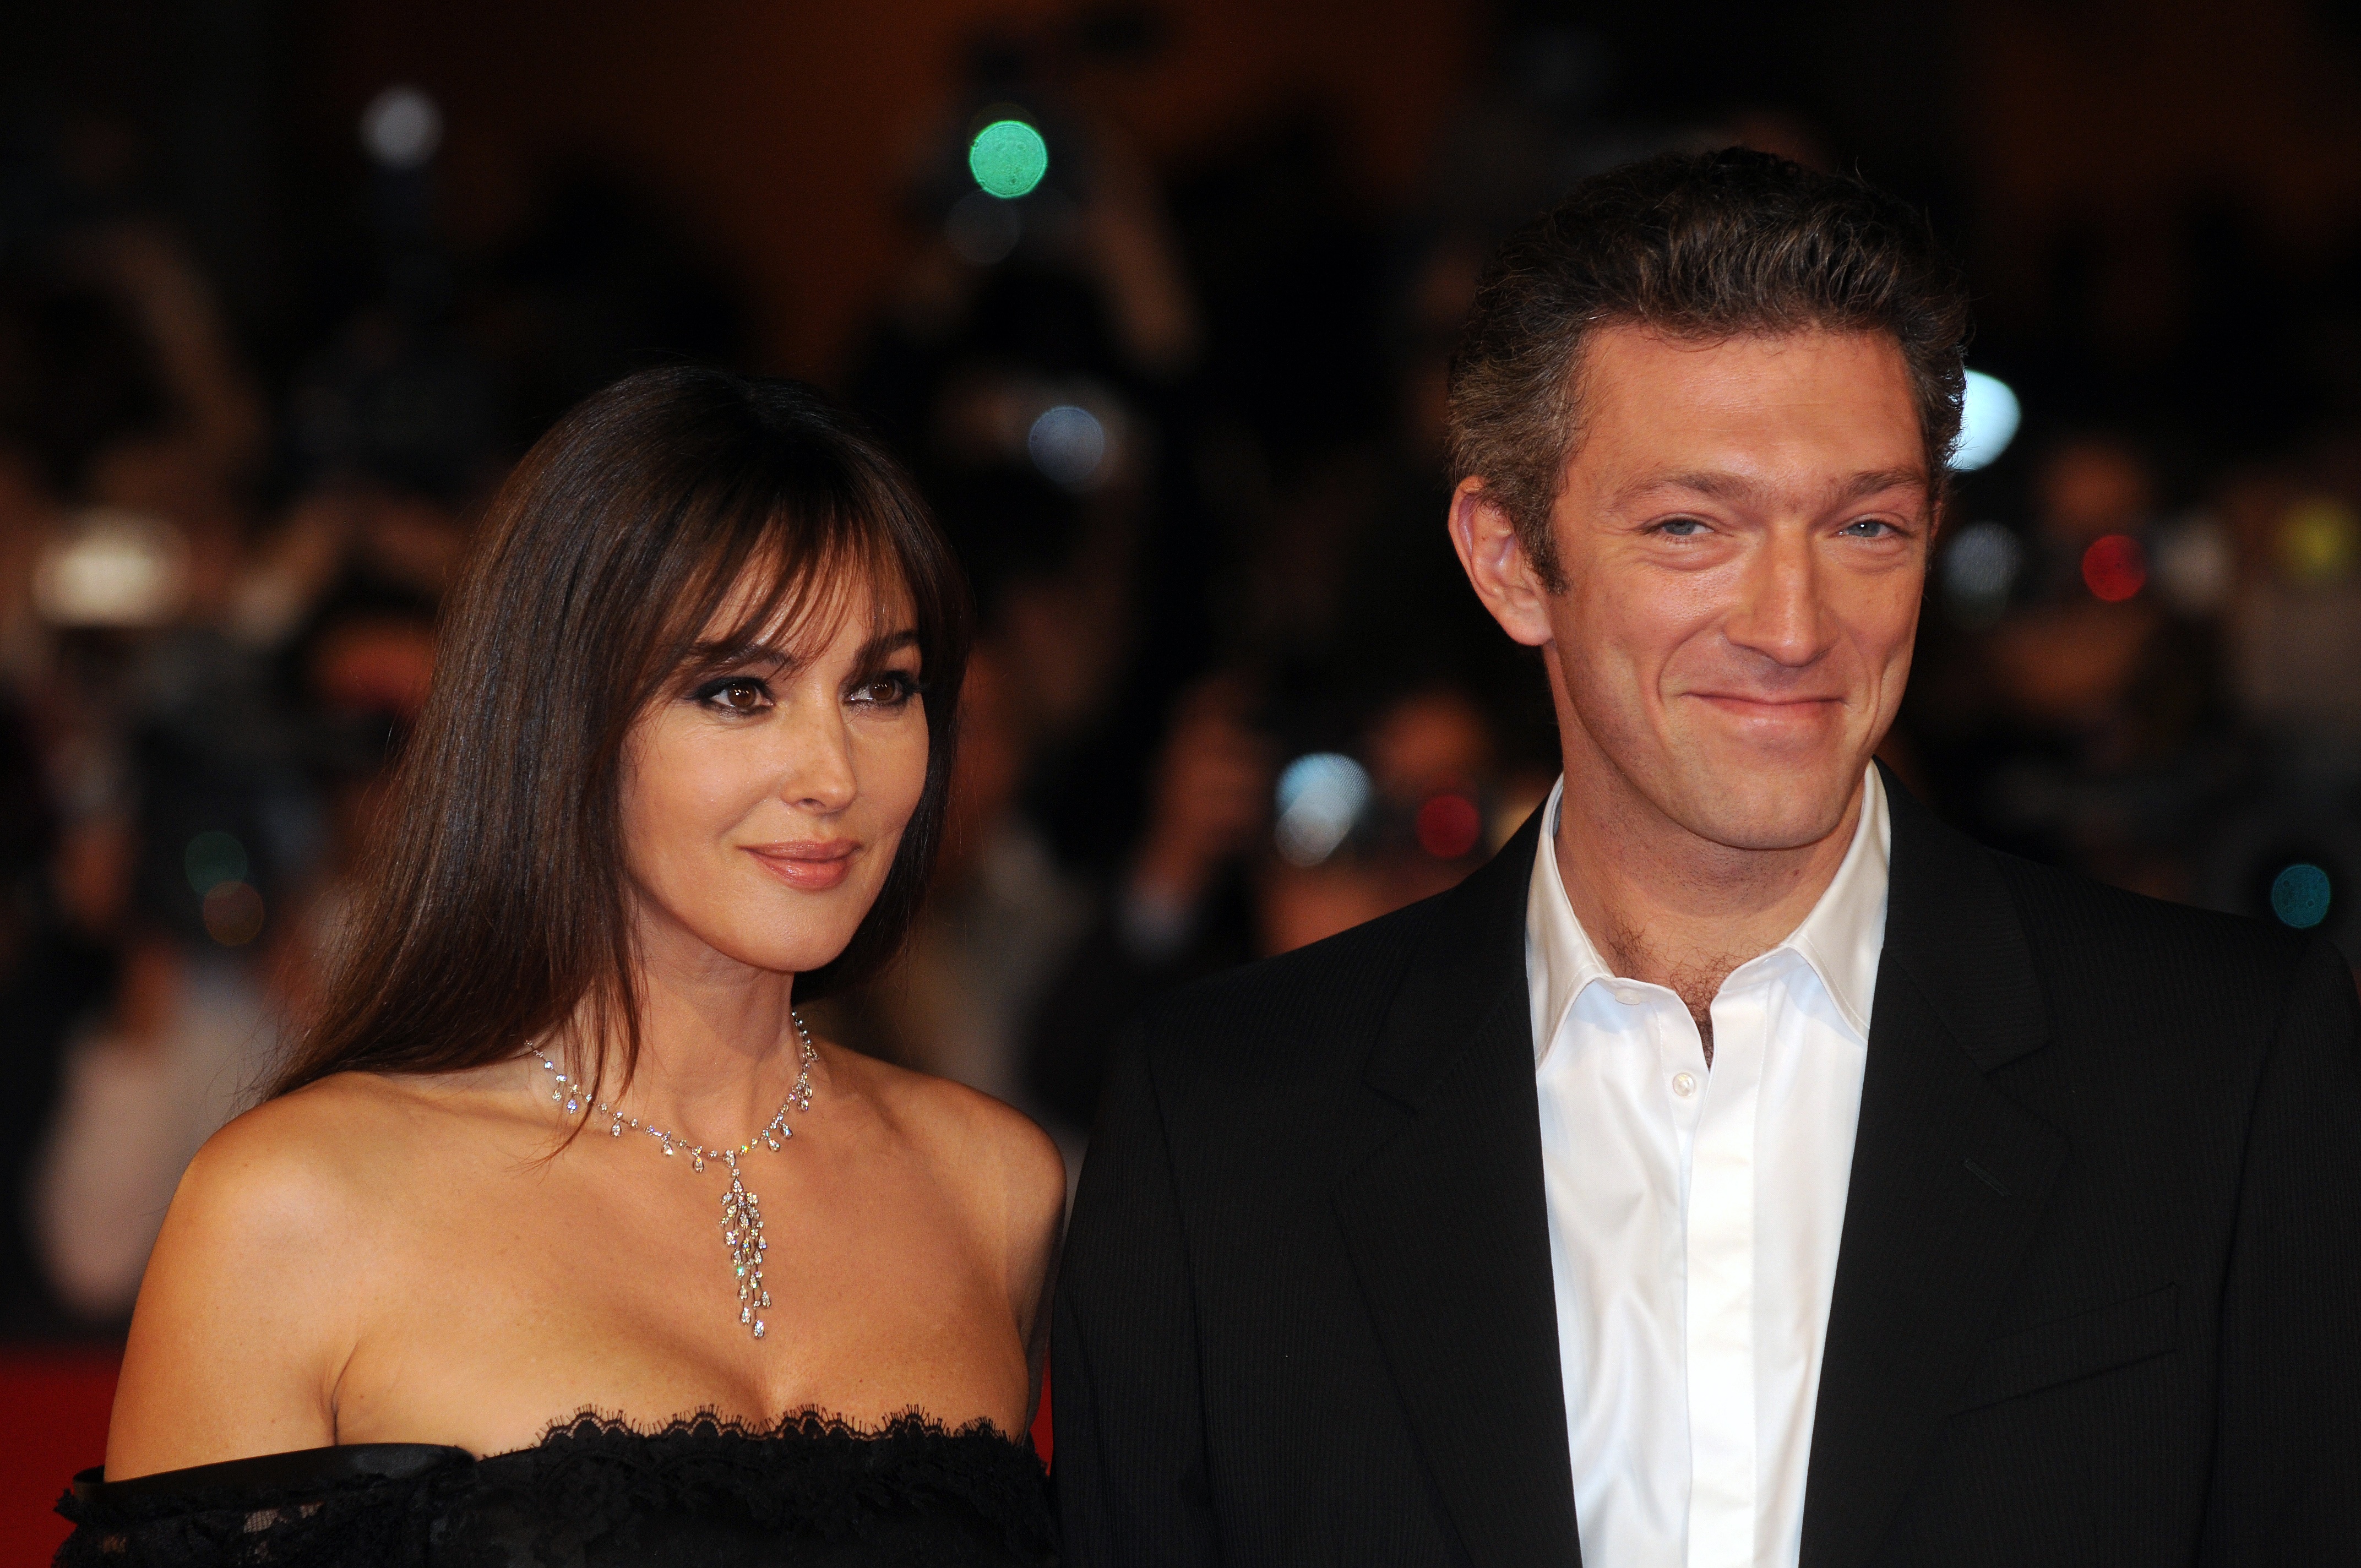 Monica Bellucci and Vincent Cassel  at The Third Rome Film Festival: Premiere of the Italian film "The Man Who Loves" in Rome, Italy on October 23, 2008 | Source: Getty Images